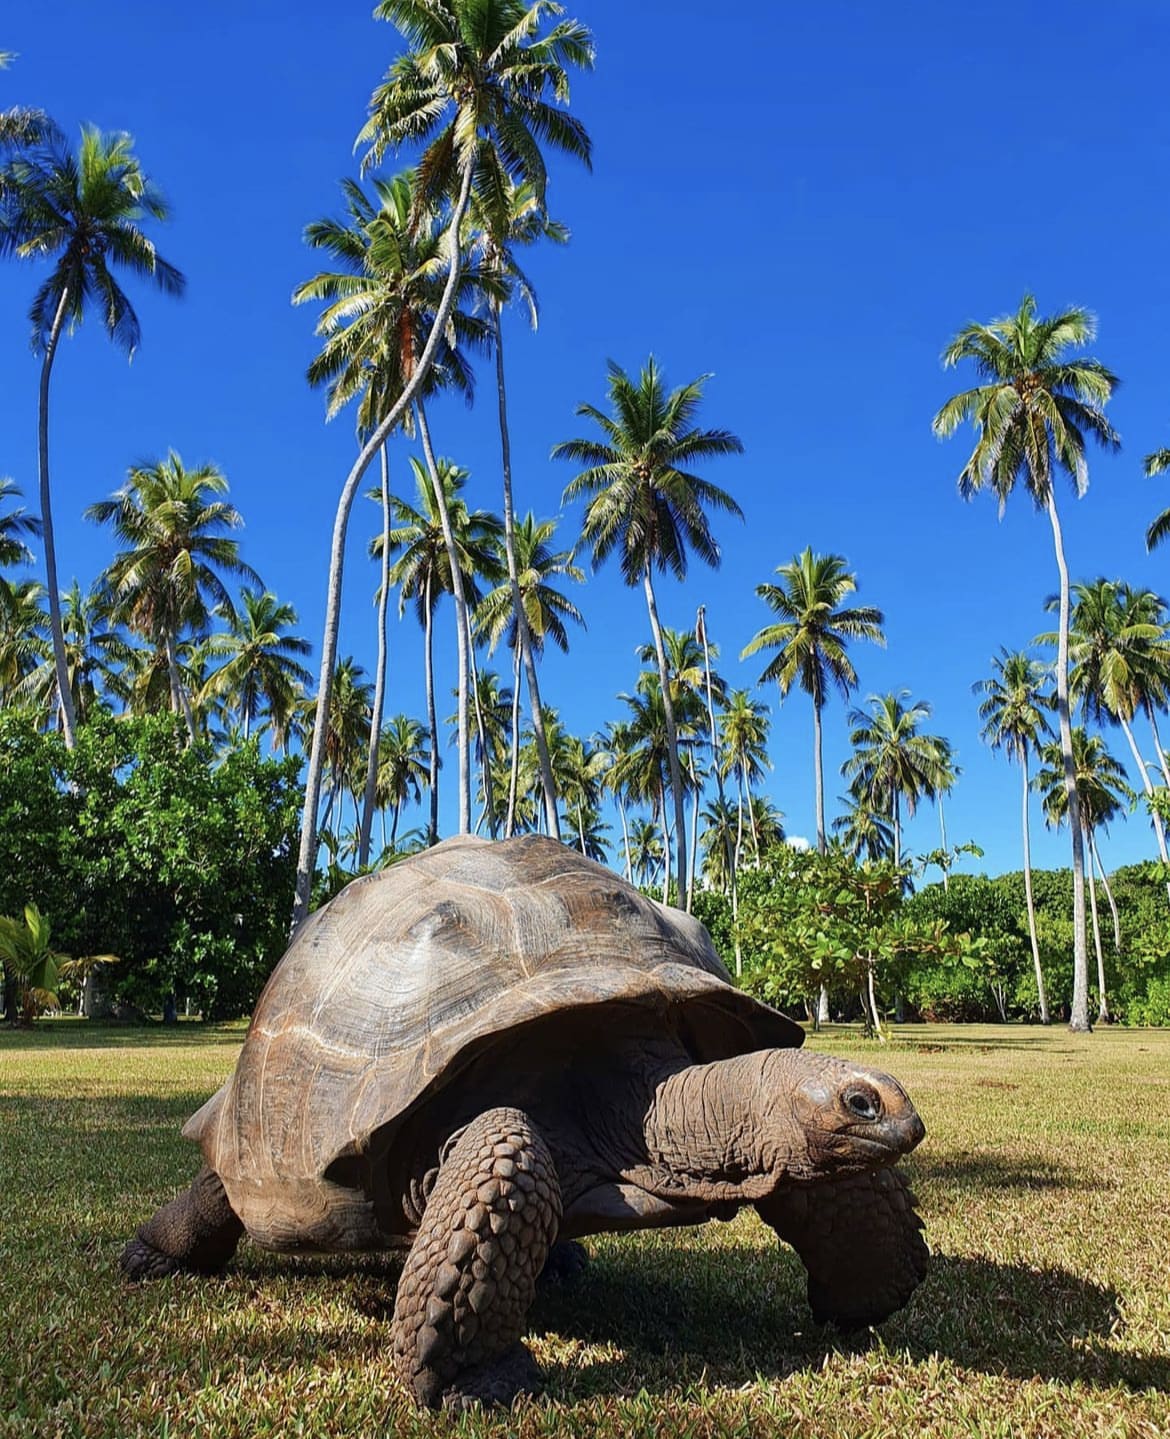 A giant tortoise on the North Island